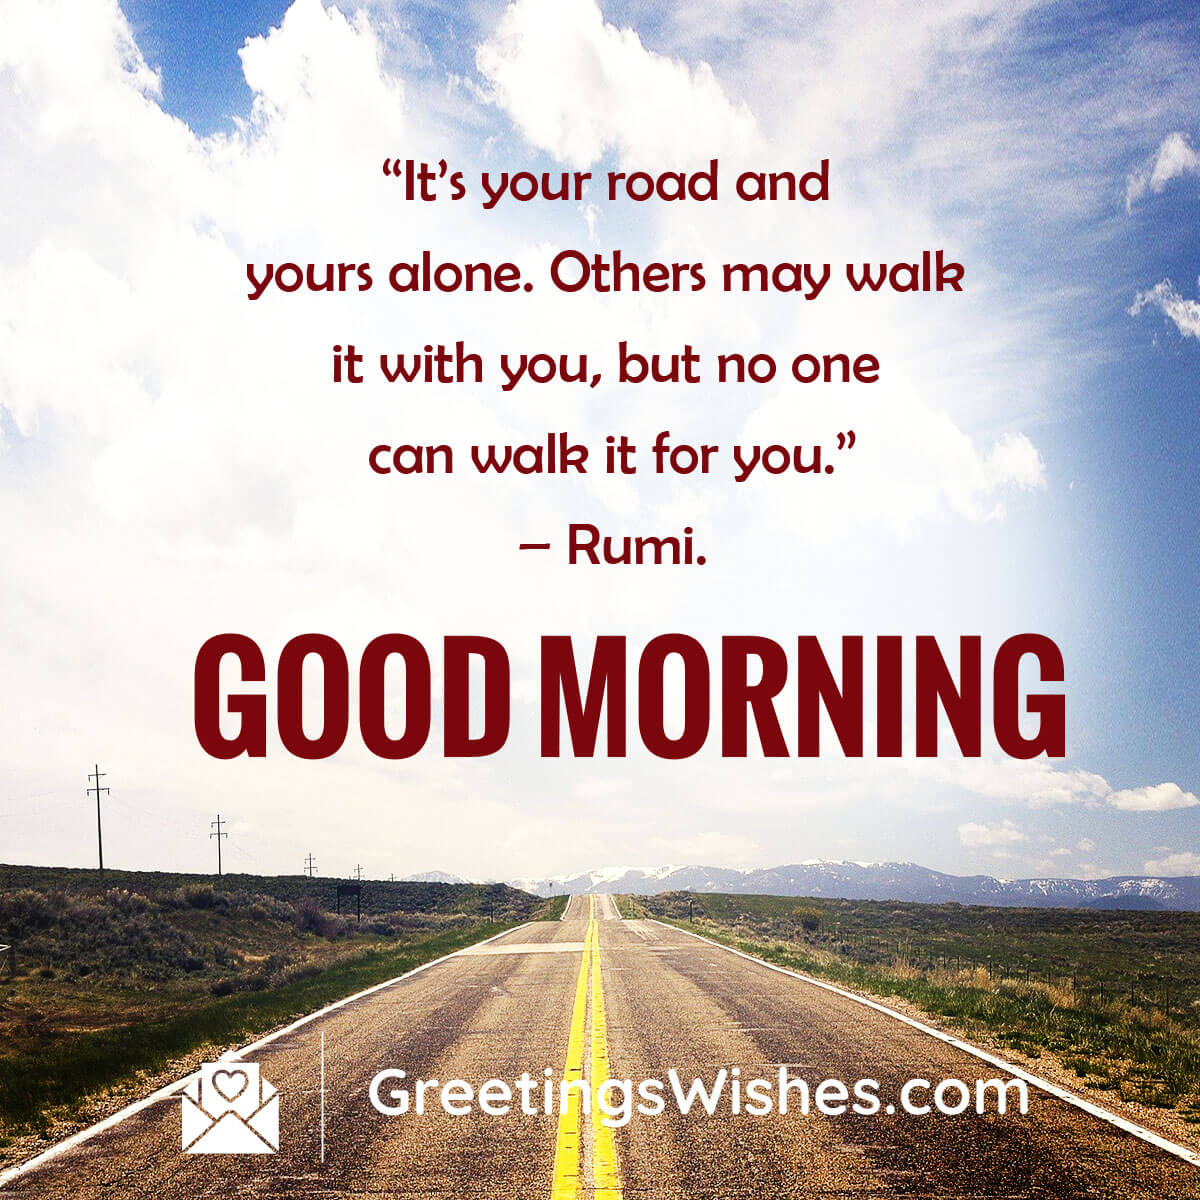 Good Morning Rumi Quotes - Greetings Wishes